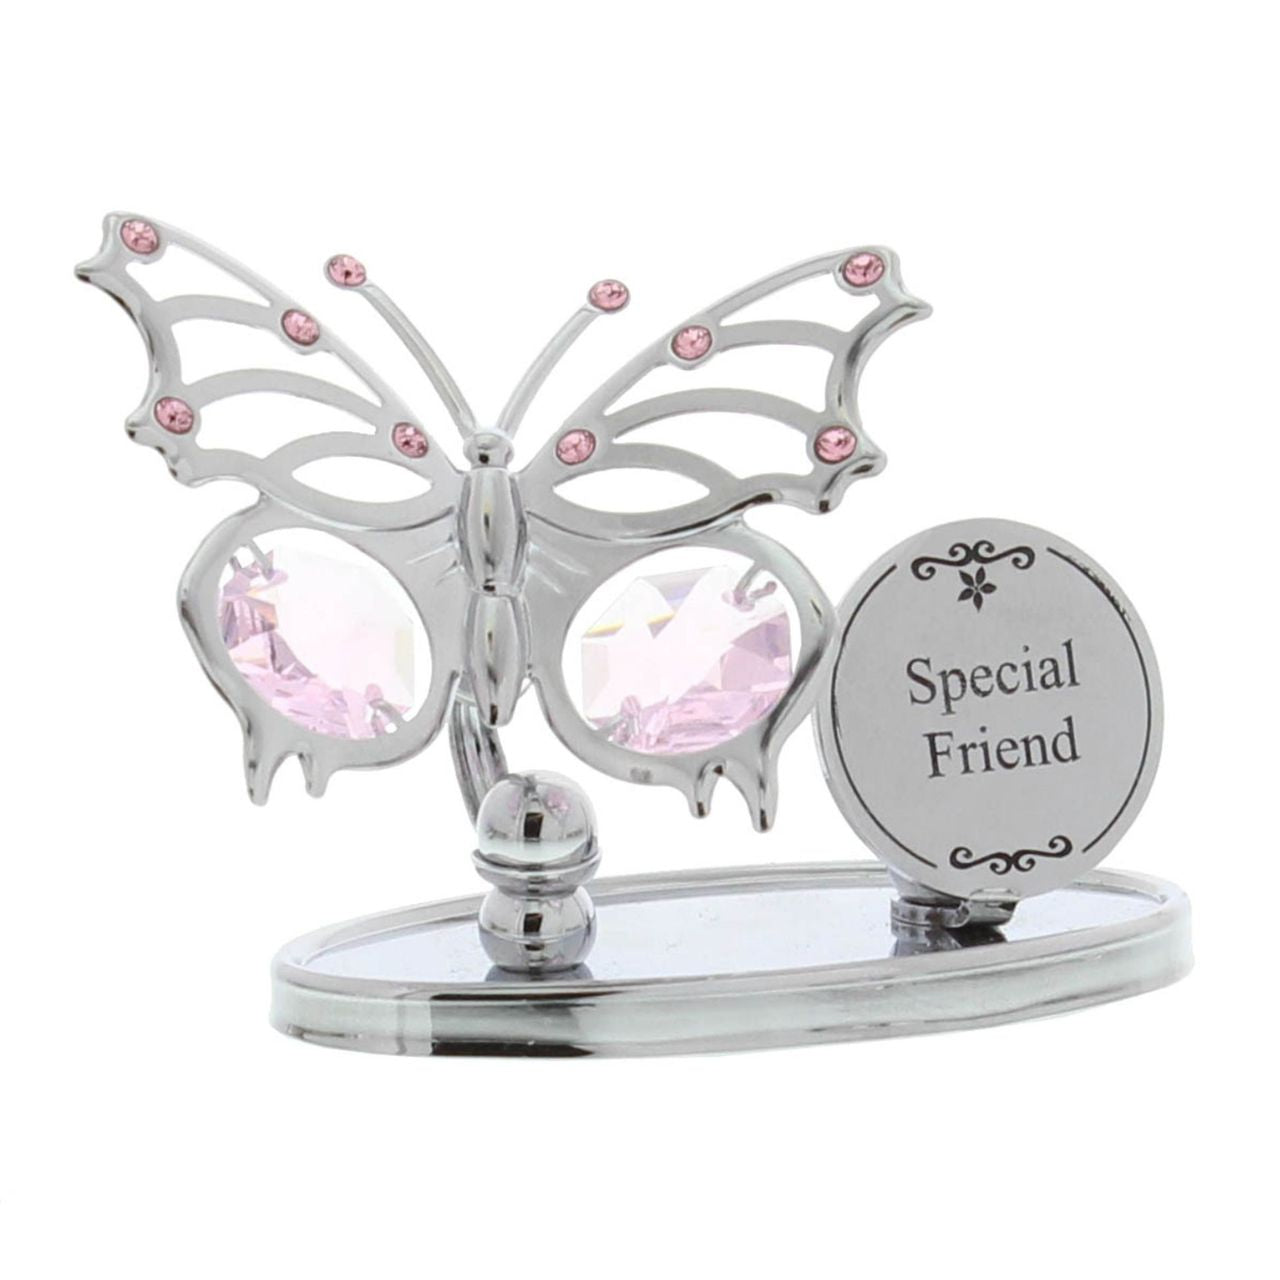 Chrome Plated Butterfly Plaque - Special Friend  A beautiful chrome plated freestanding Crystocraft butterfly ornament with a 'Special Friend' plaque. The elegant butterfly is embellished with soft pink crystals Austrian Crystals to make an elegant and eye catching gift.